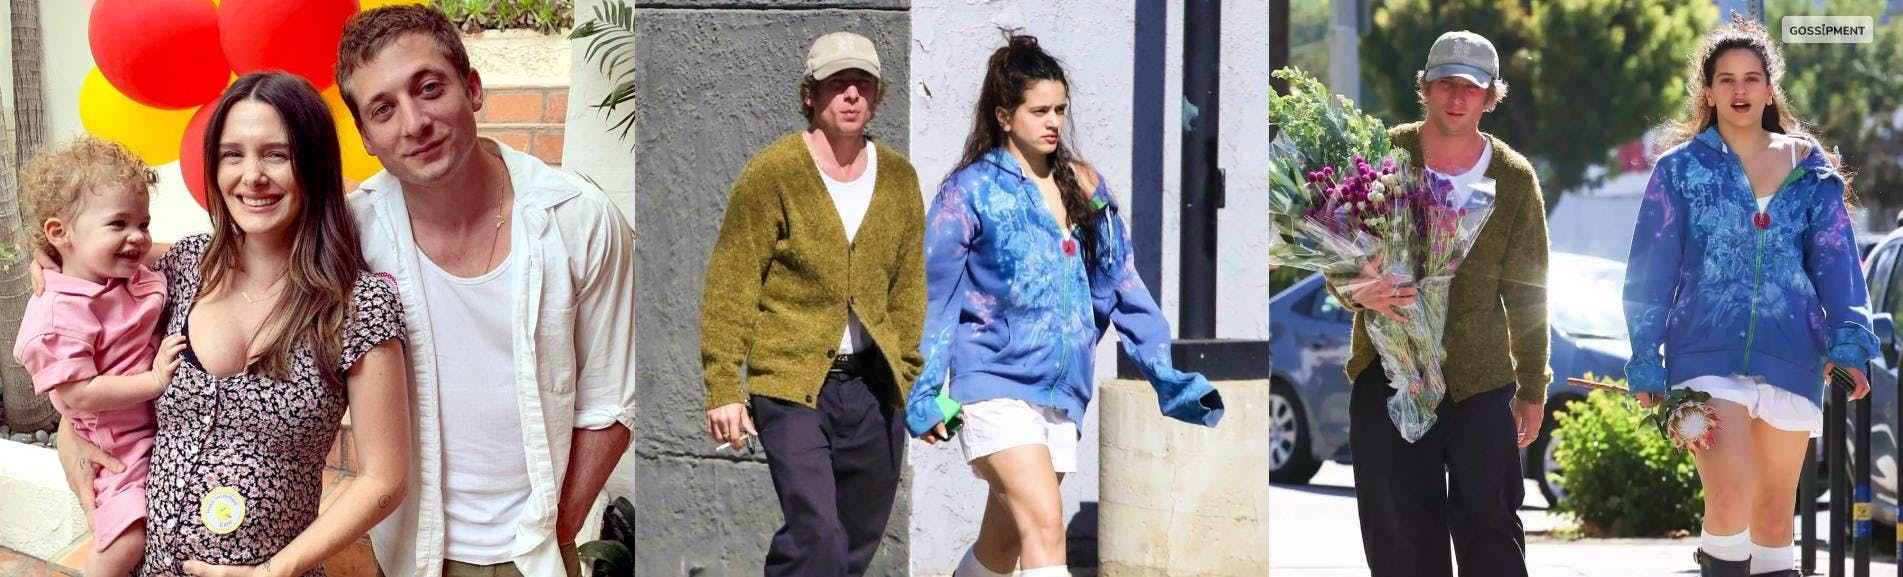 Cover Image for Jeremy Allen White Spark Dating Rumors With Rosalía Amid Ongoing Divorce From Addison Timlin